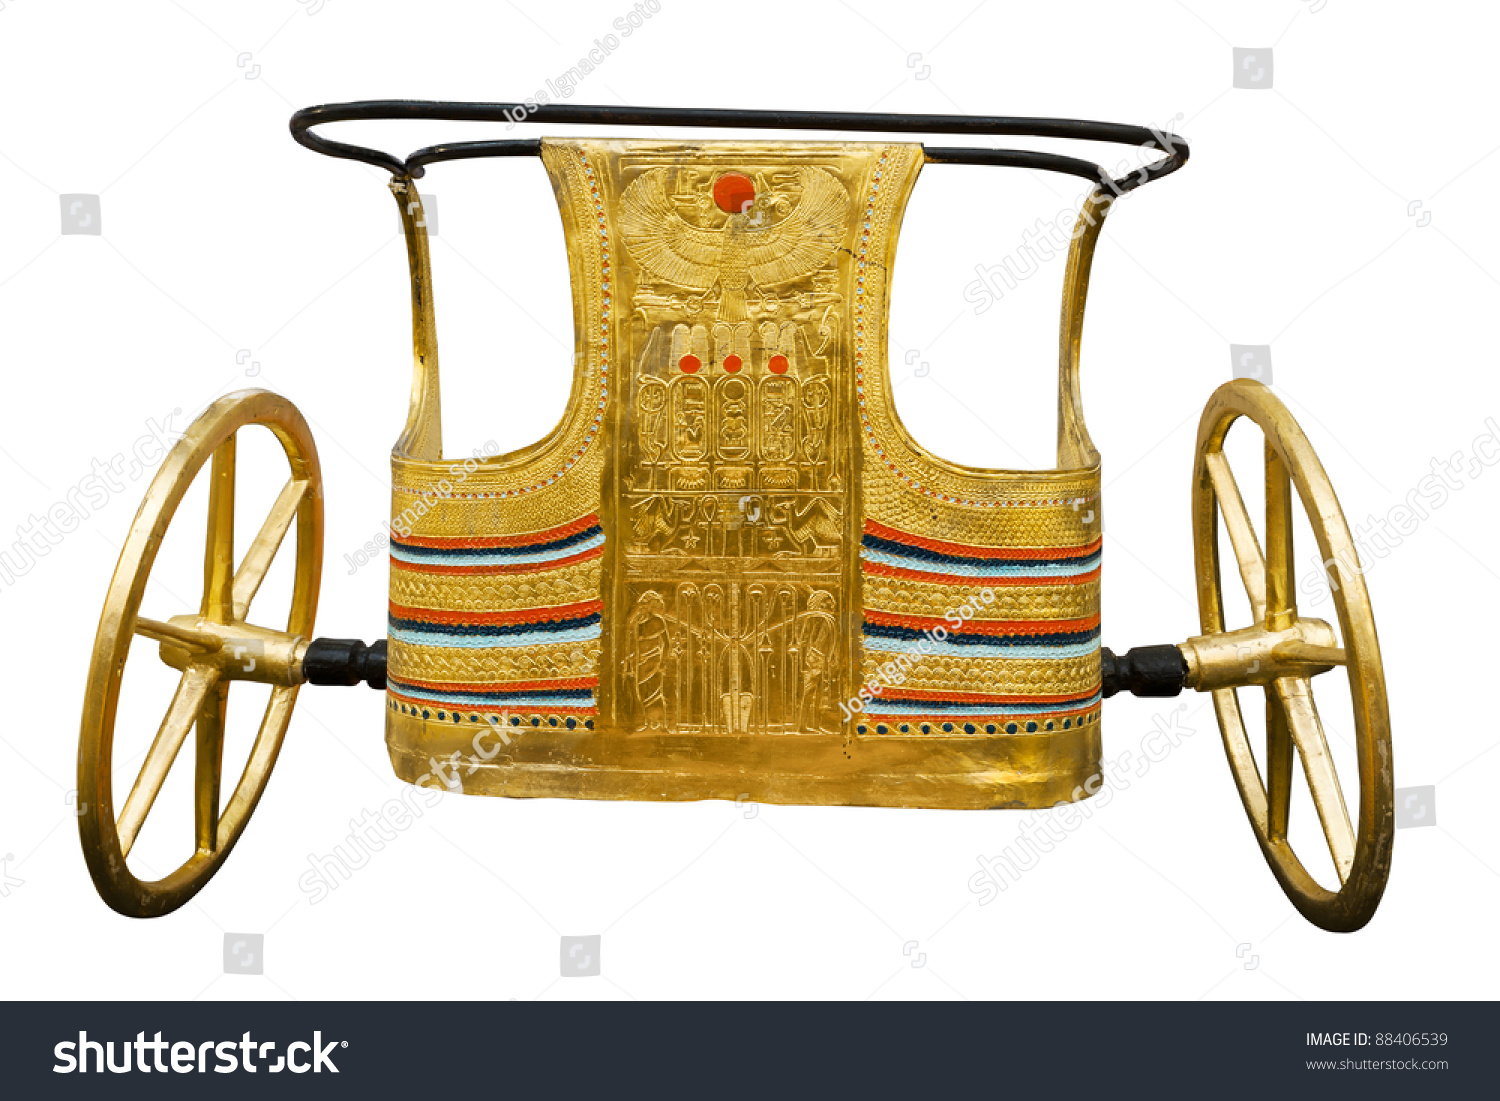 Ancient Egyptian Ceremonial Chariot Isolated With Clipping Path Modern